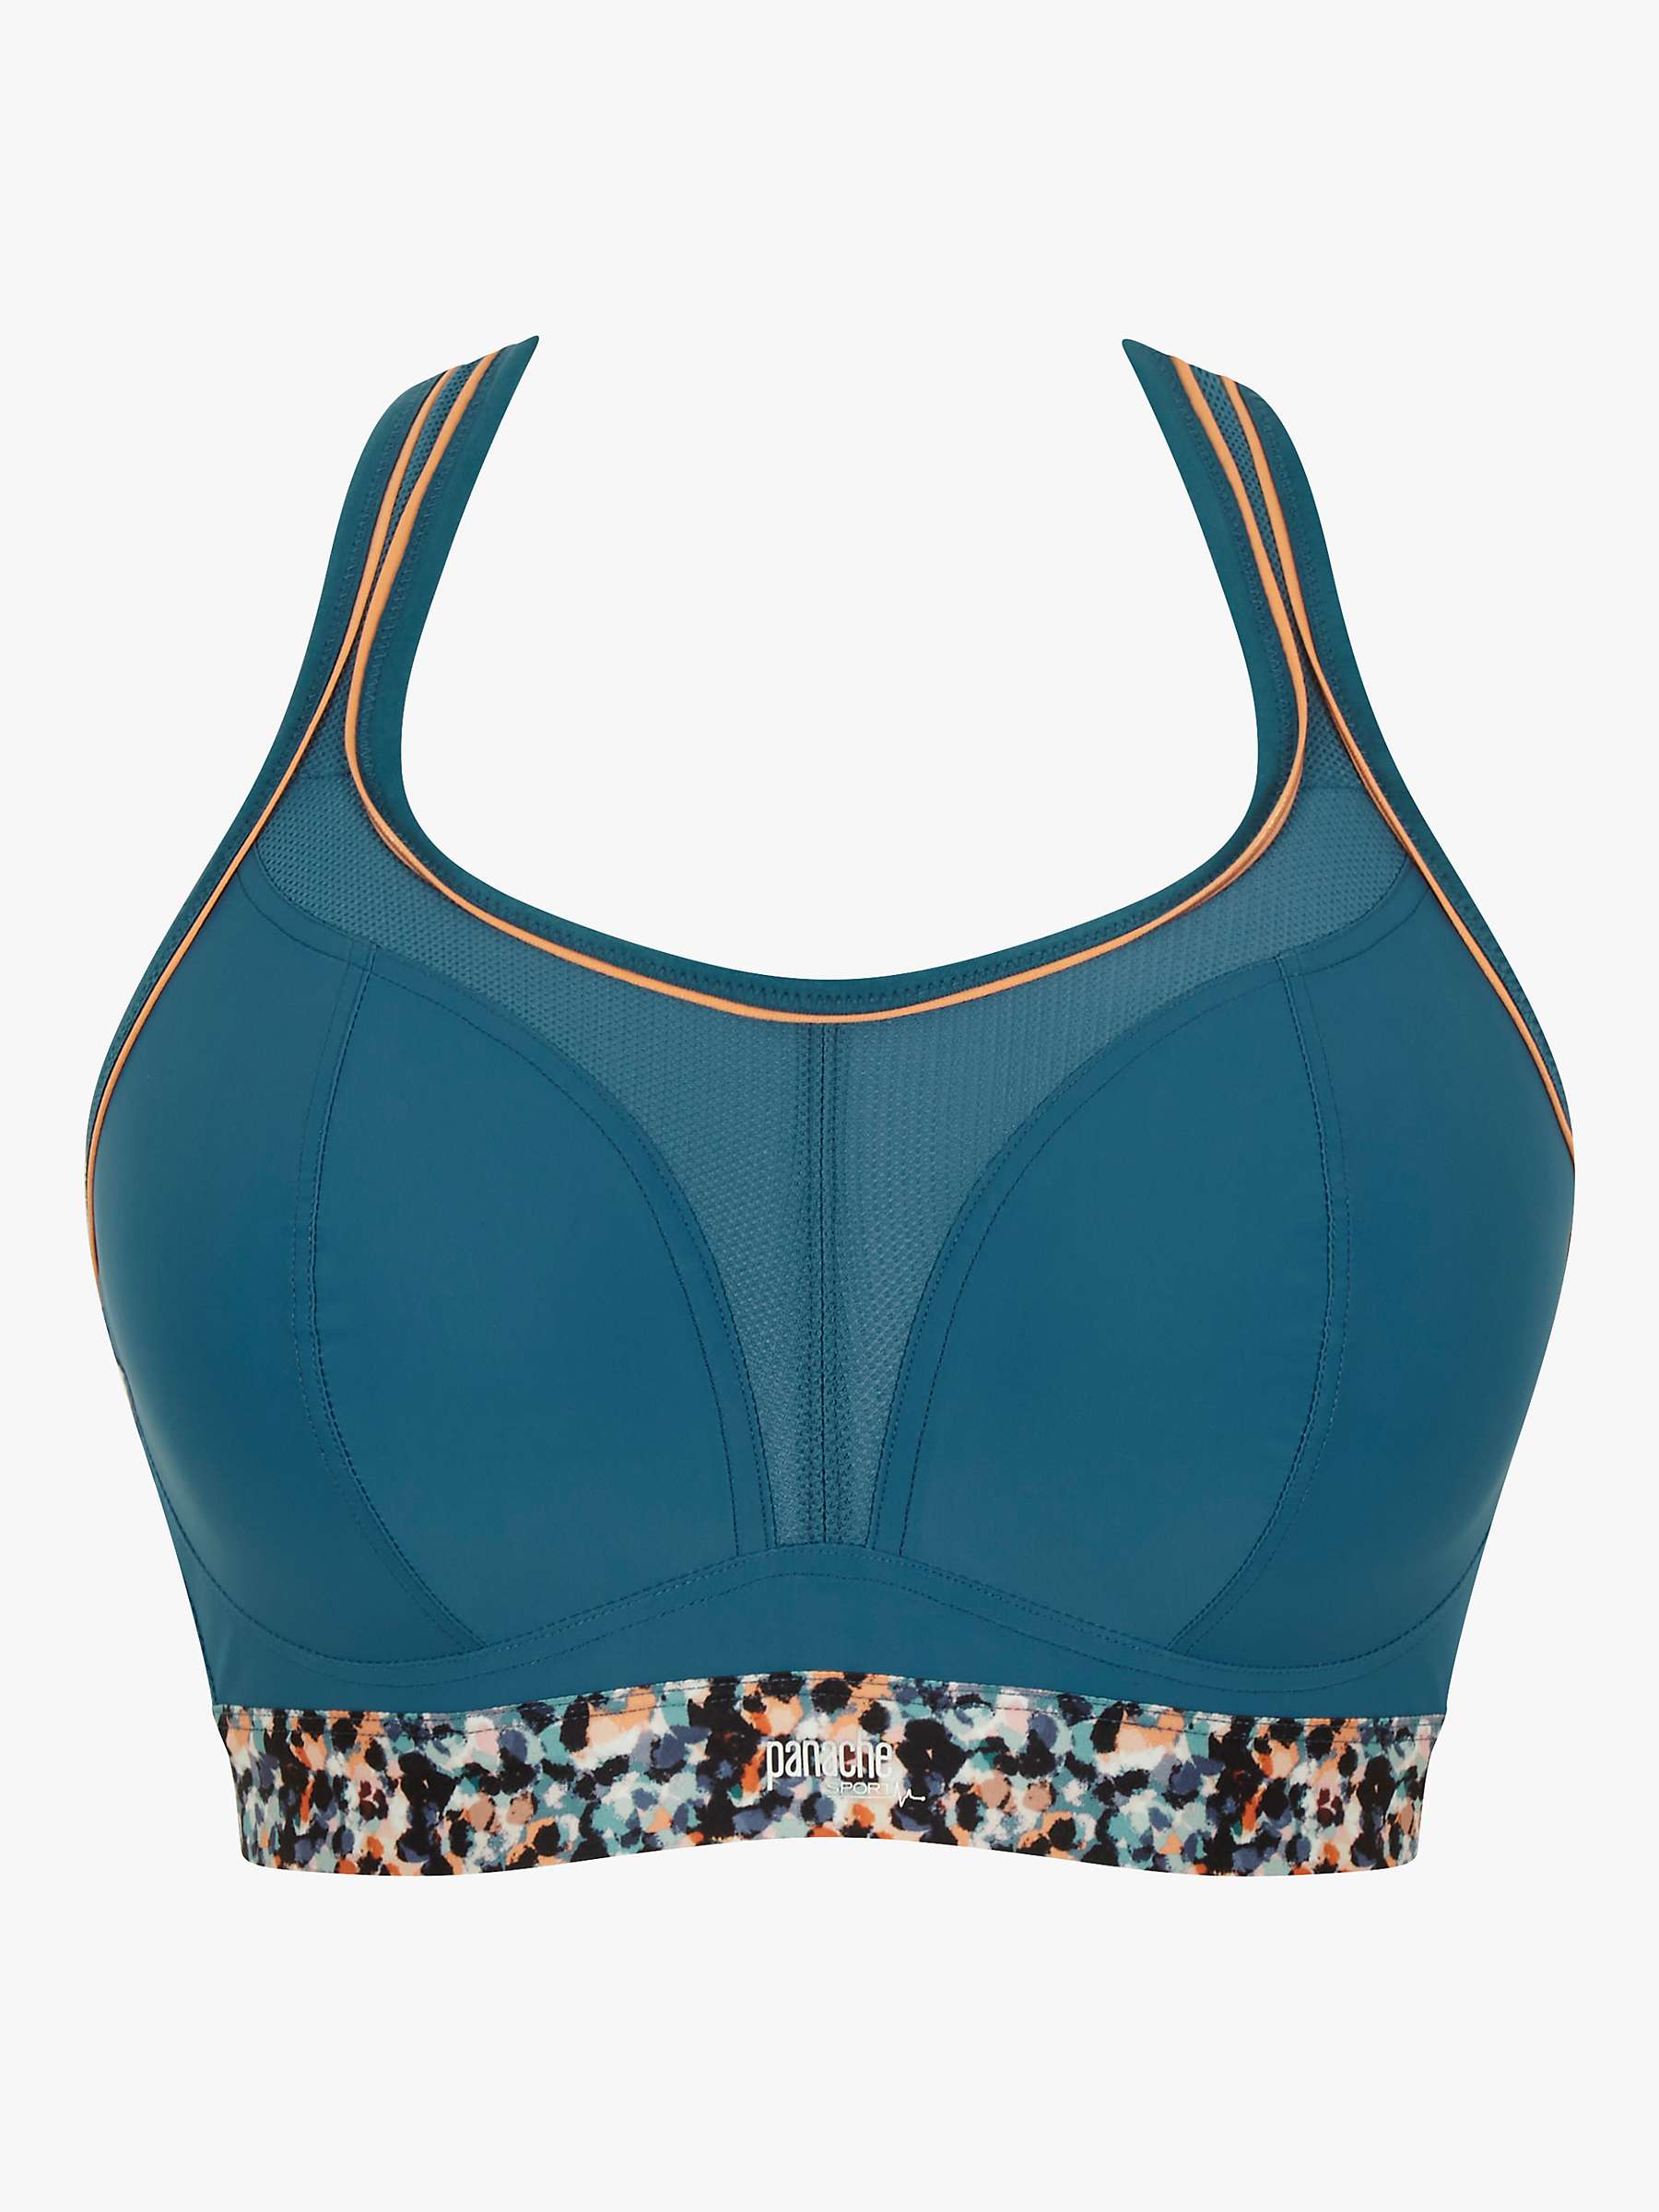 Buy Panache Abstract Animal Print Non Wired Sports Bra, Blue/Multi Online at johnlewis.com